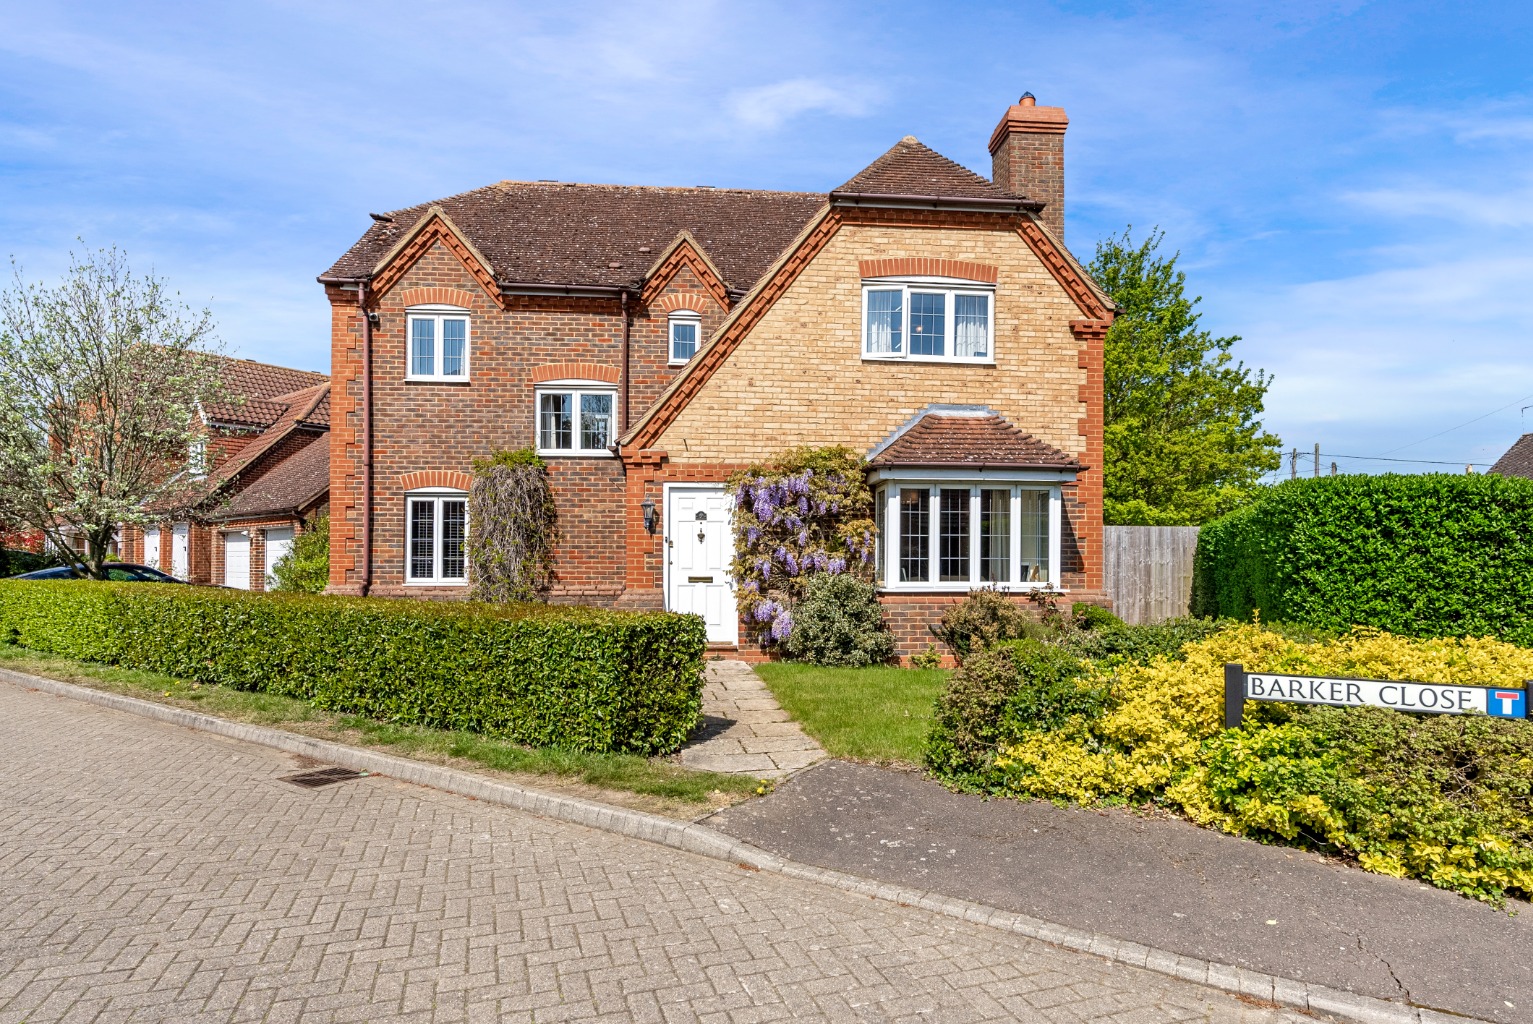 Set in a peaceful spot within the pretty Cambridgeshire village of Hail Weston, this spacious detached home is immaculately presented and offers potential buyers a chance to move in to their dream home with almost nothing to do.